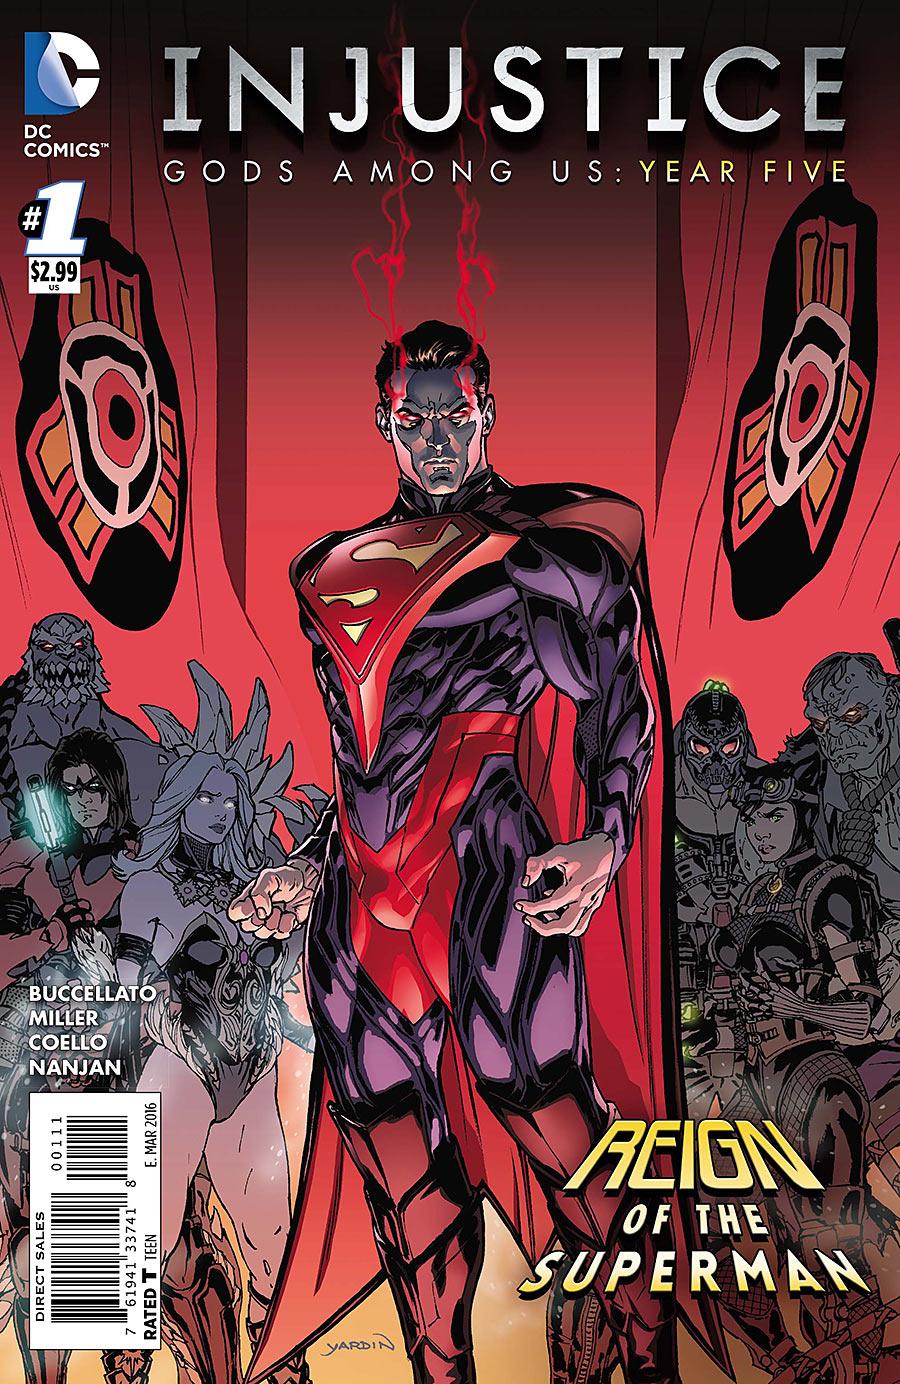 Injustice: Gods Among Us: Year Five Vol. 1 #1